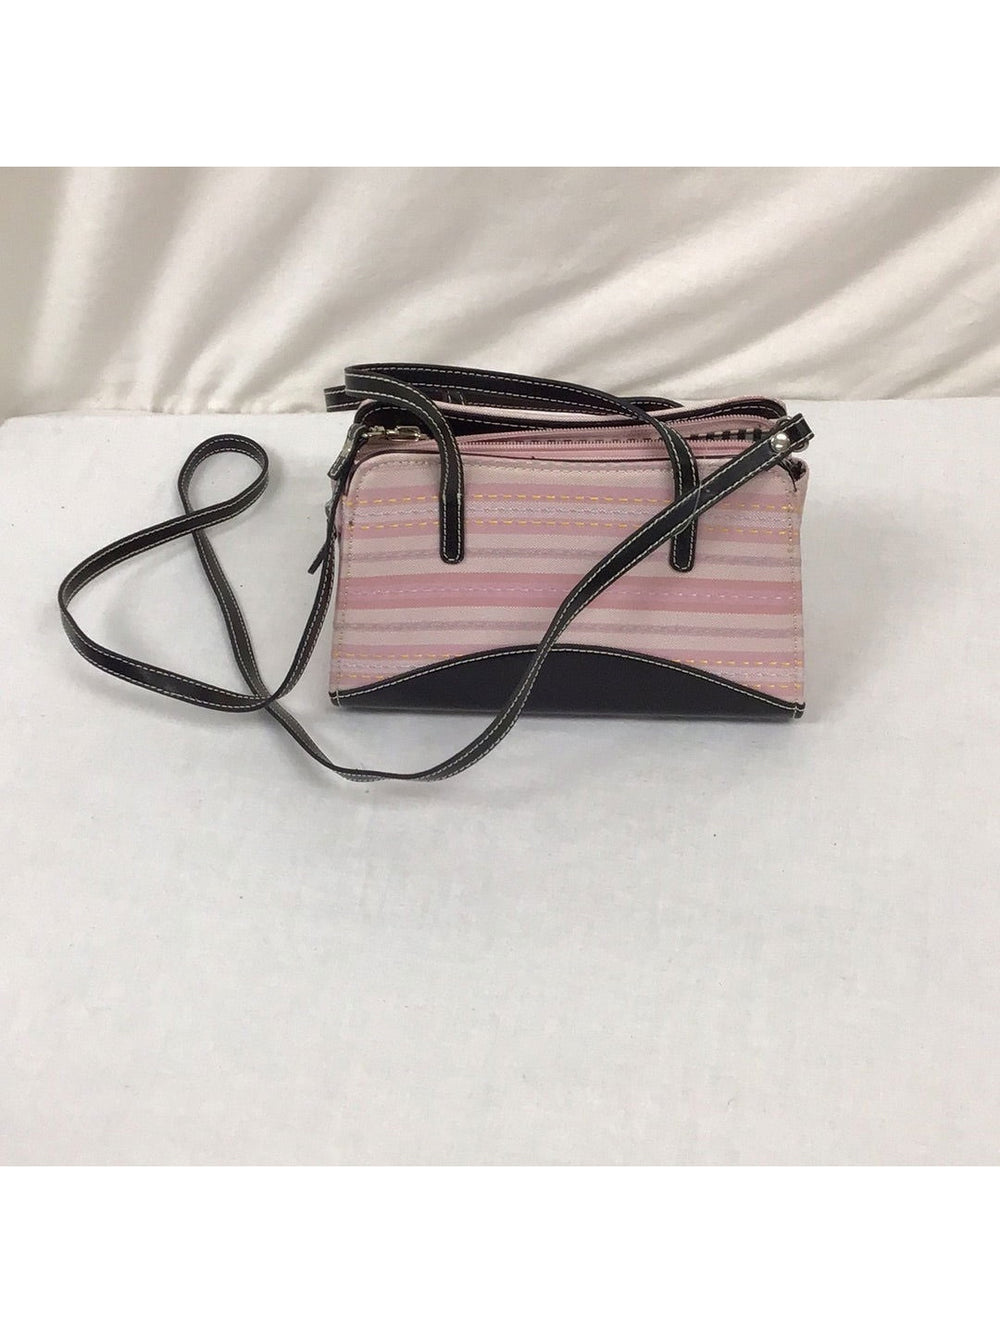 Ladies Pink Striped Small Multi Colored Handbag - The Kennedy Collective Thrift - 